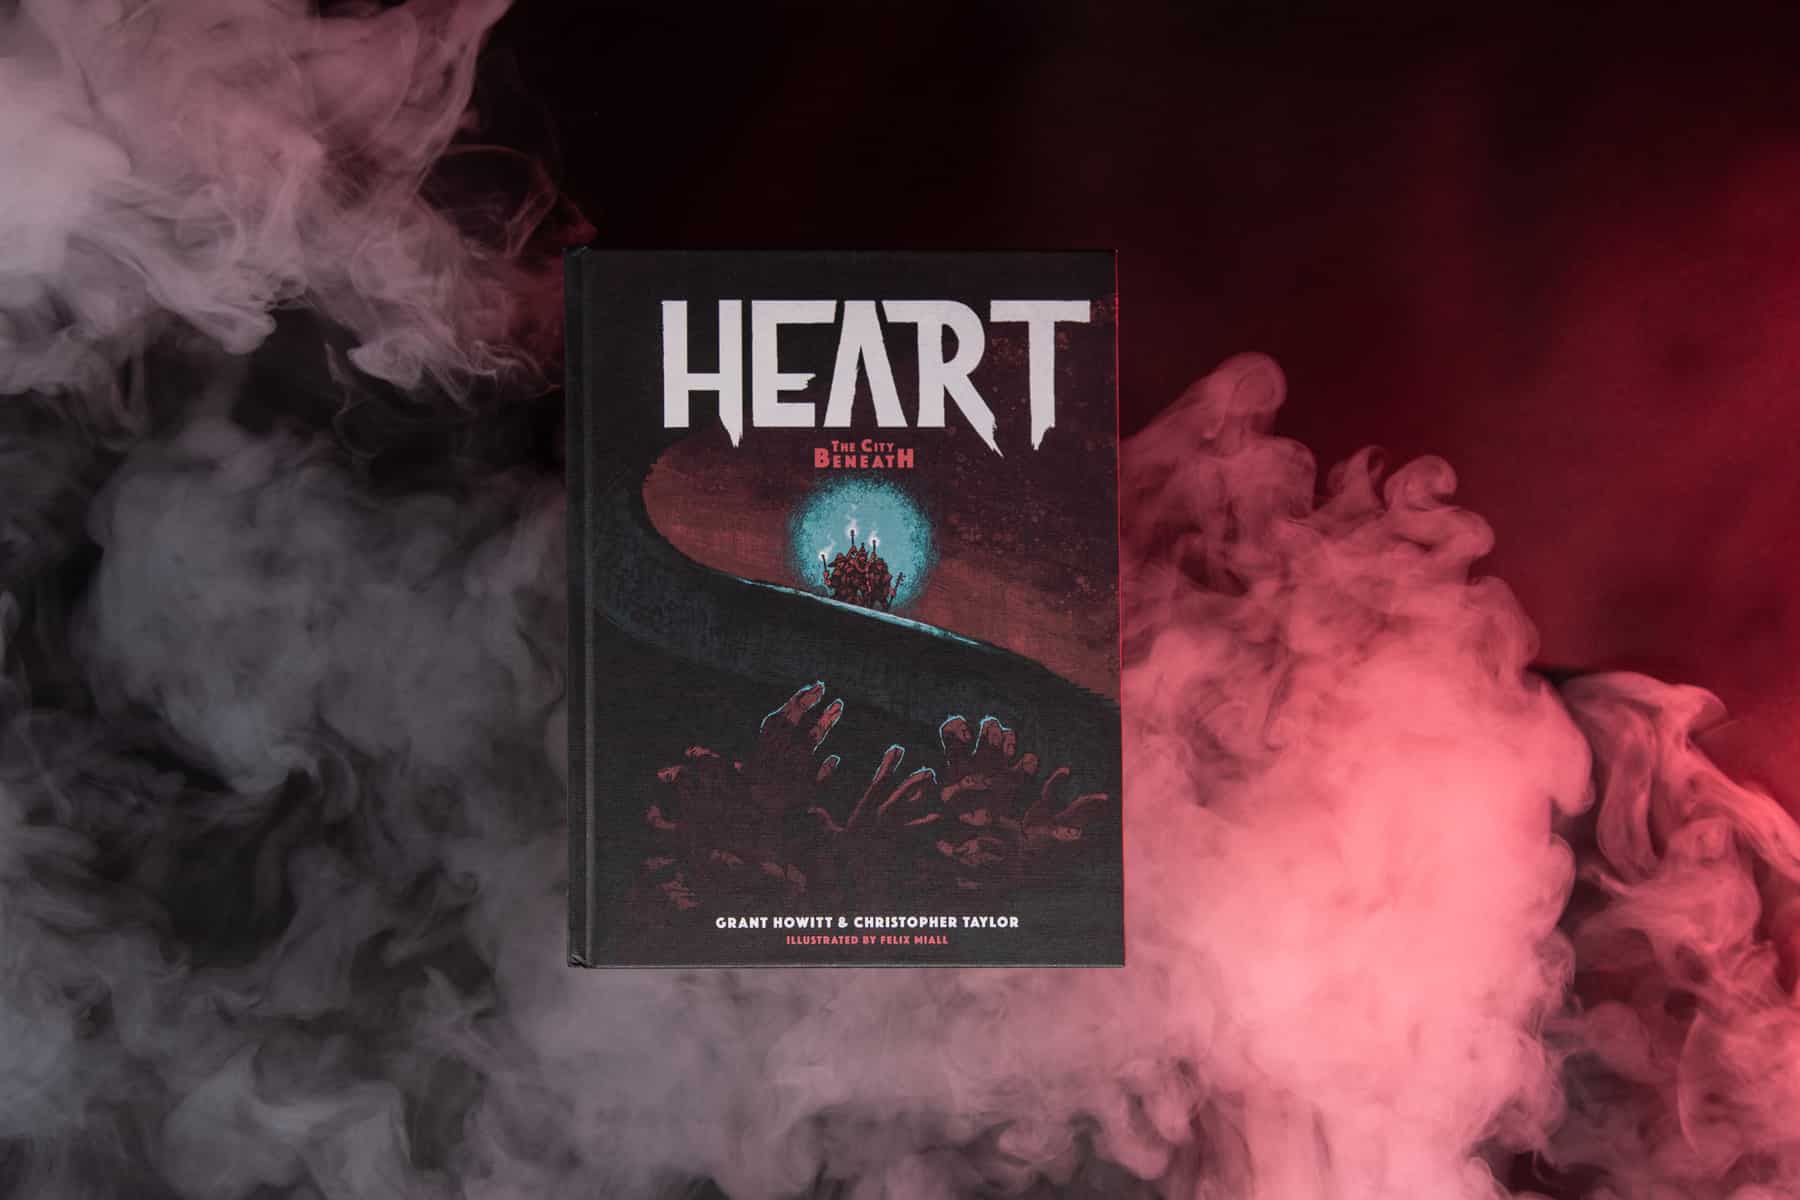 Heart front cover with smoke and red lighting © SHAW STUDIO